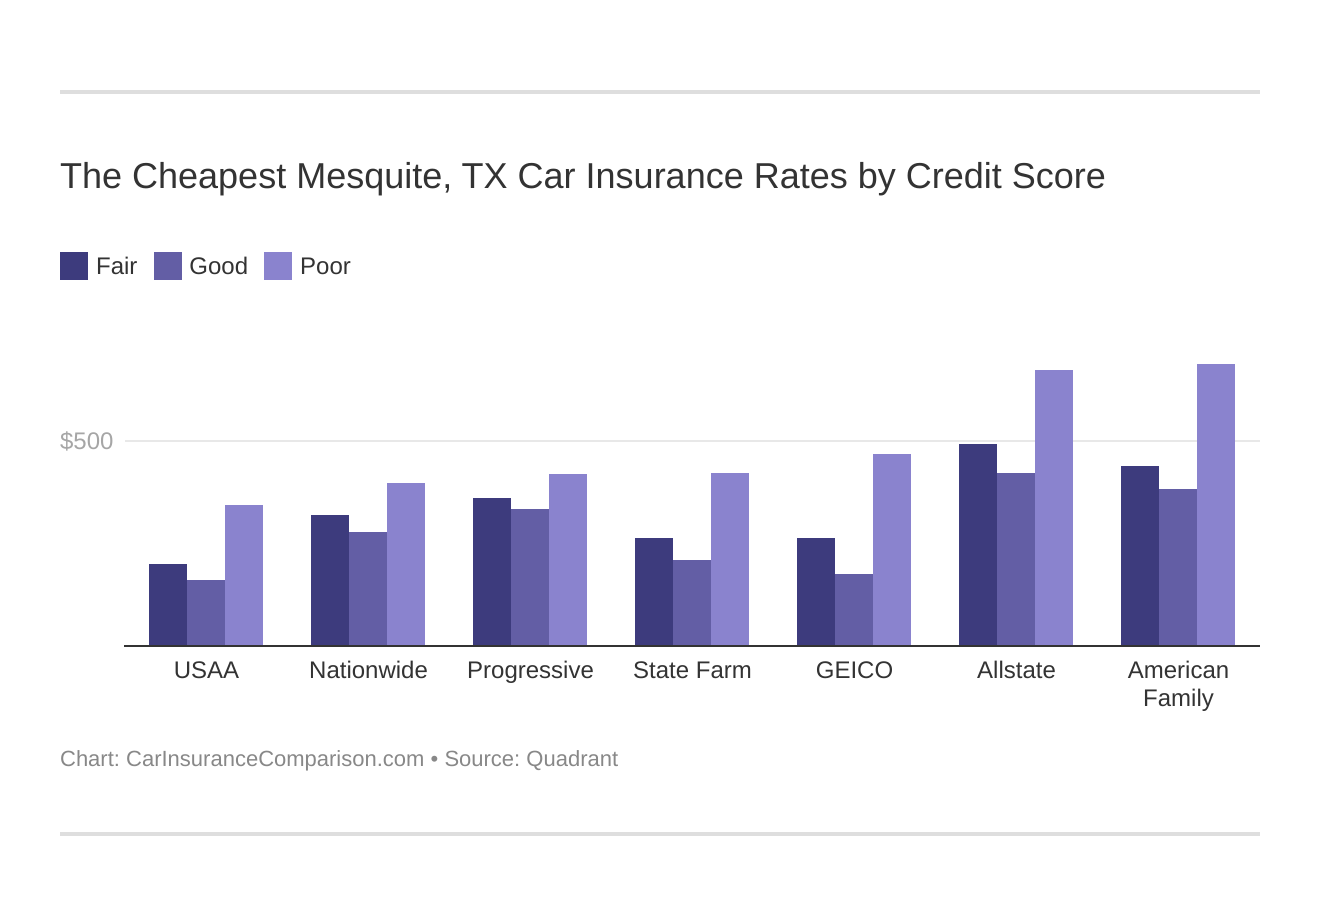 The Cheapest Mesquite, TX Car Insurance Rates by Credit Score